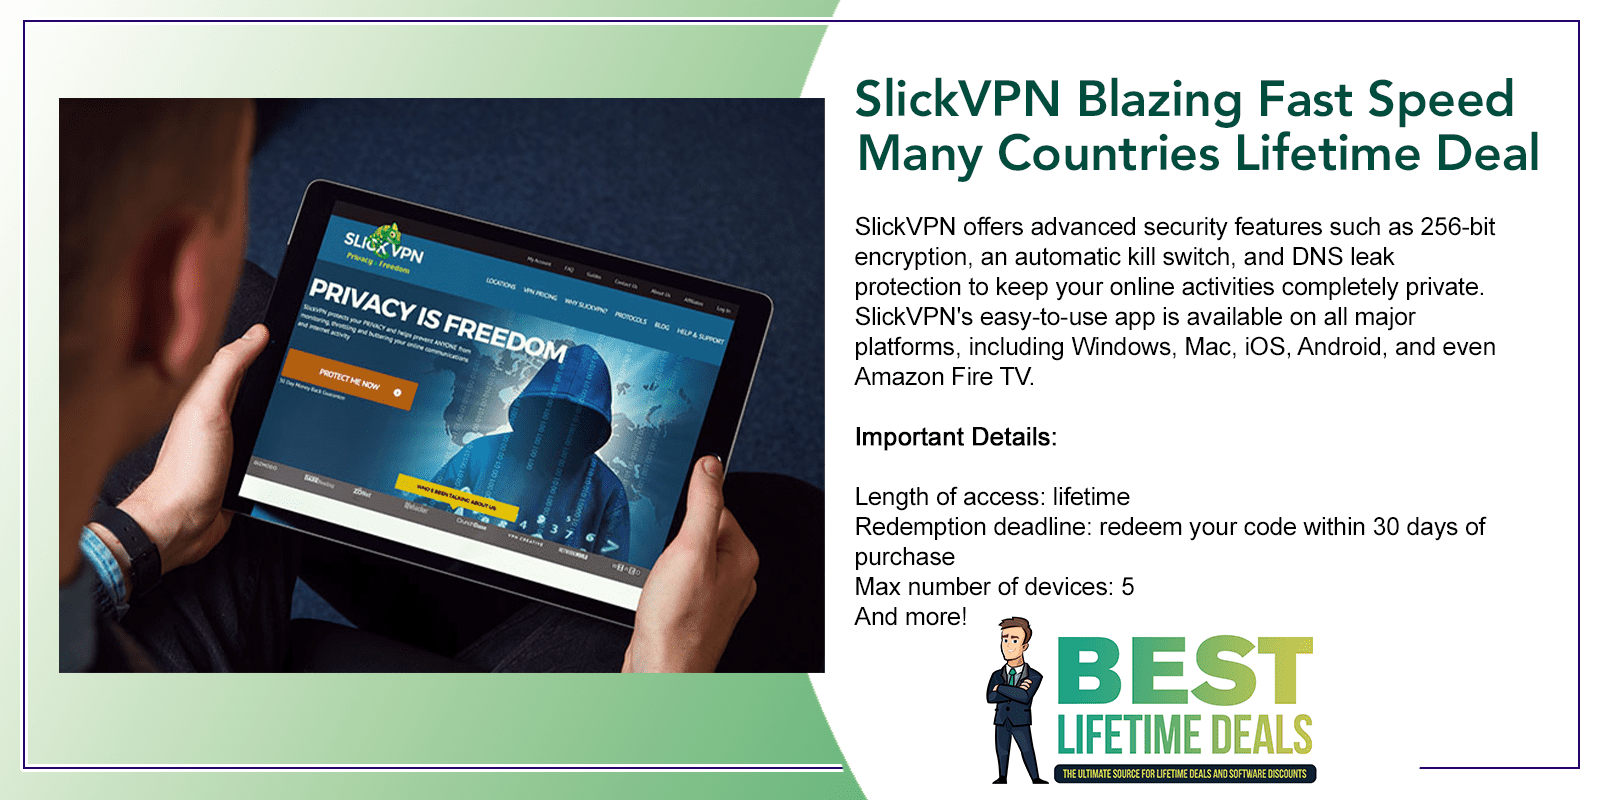 Introducing SlickVPN Blazing Fast Speed Many Countries Lifetime Deal